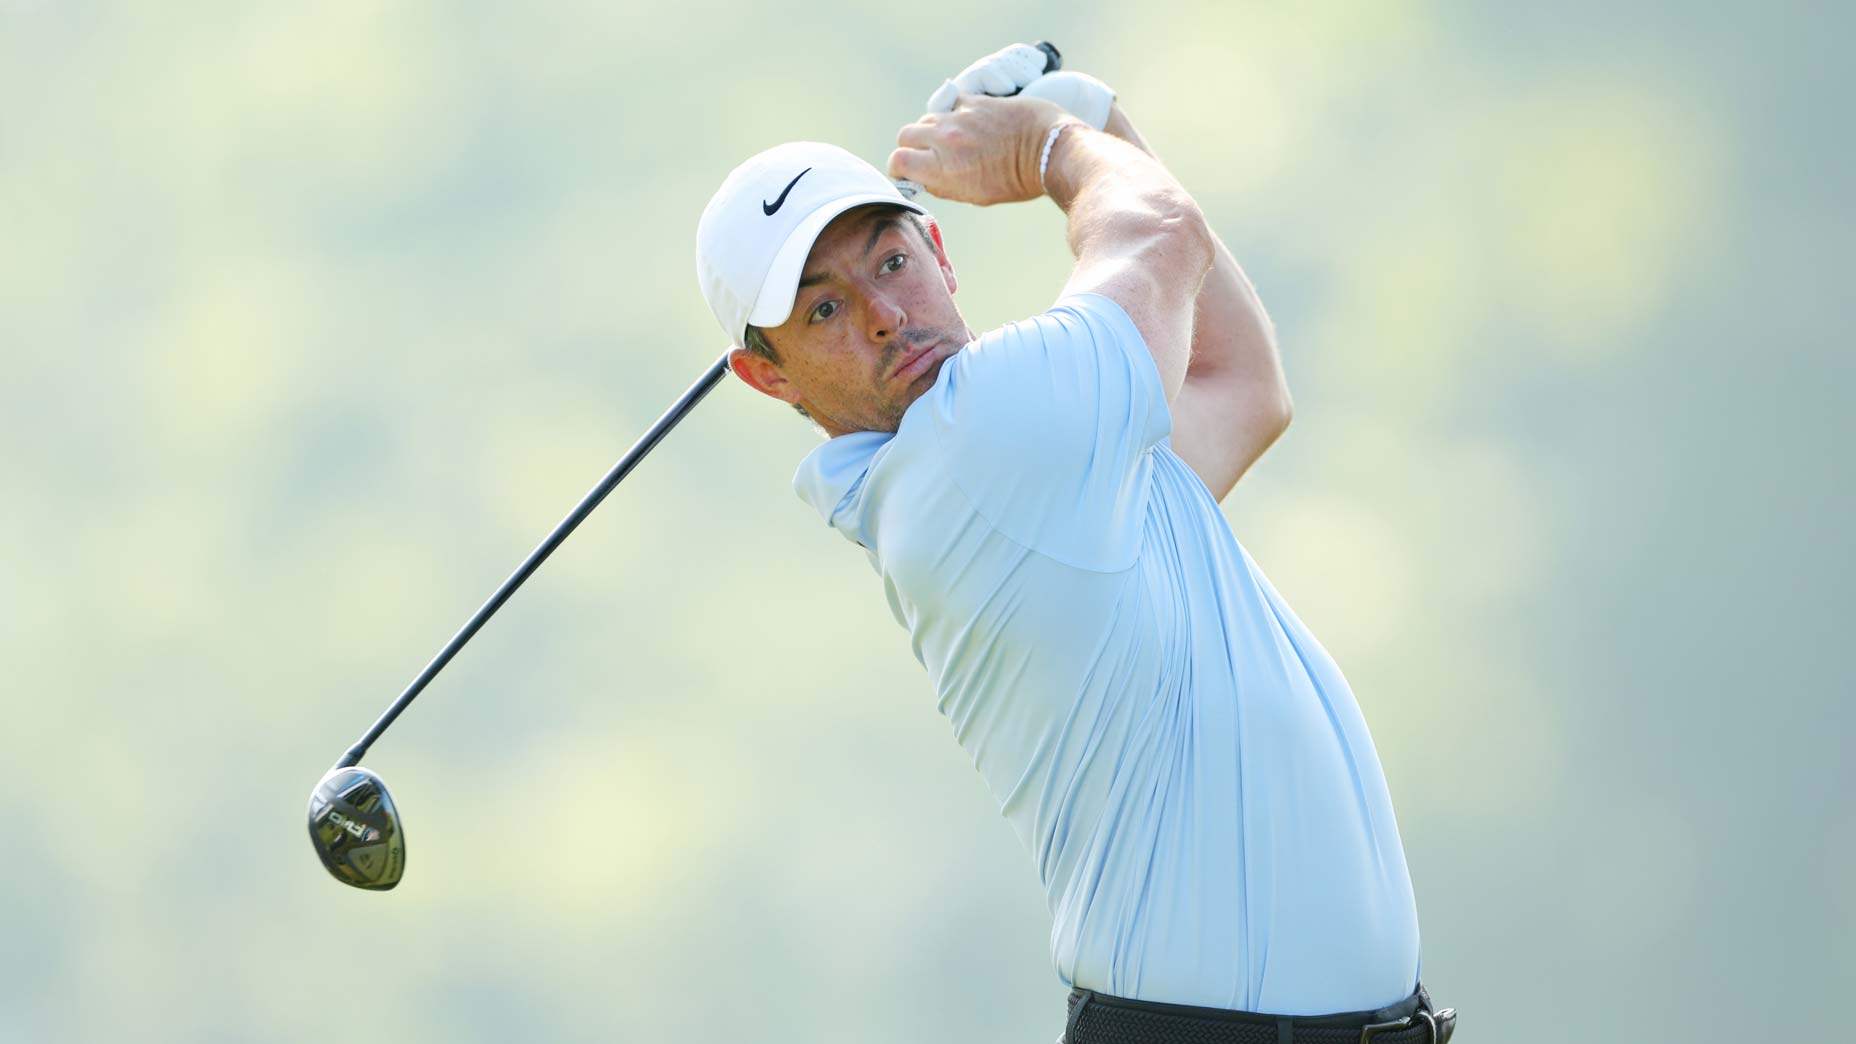 Pro golfer Rory McIlroy hits drive during Round 1 of 2024 PGA Championship at Valhalla.